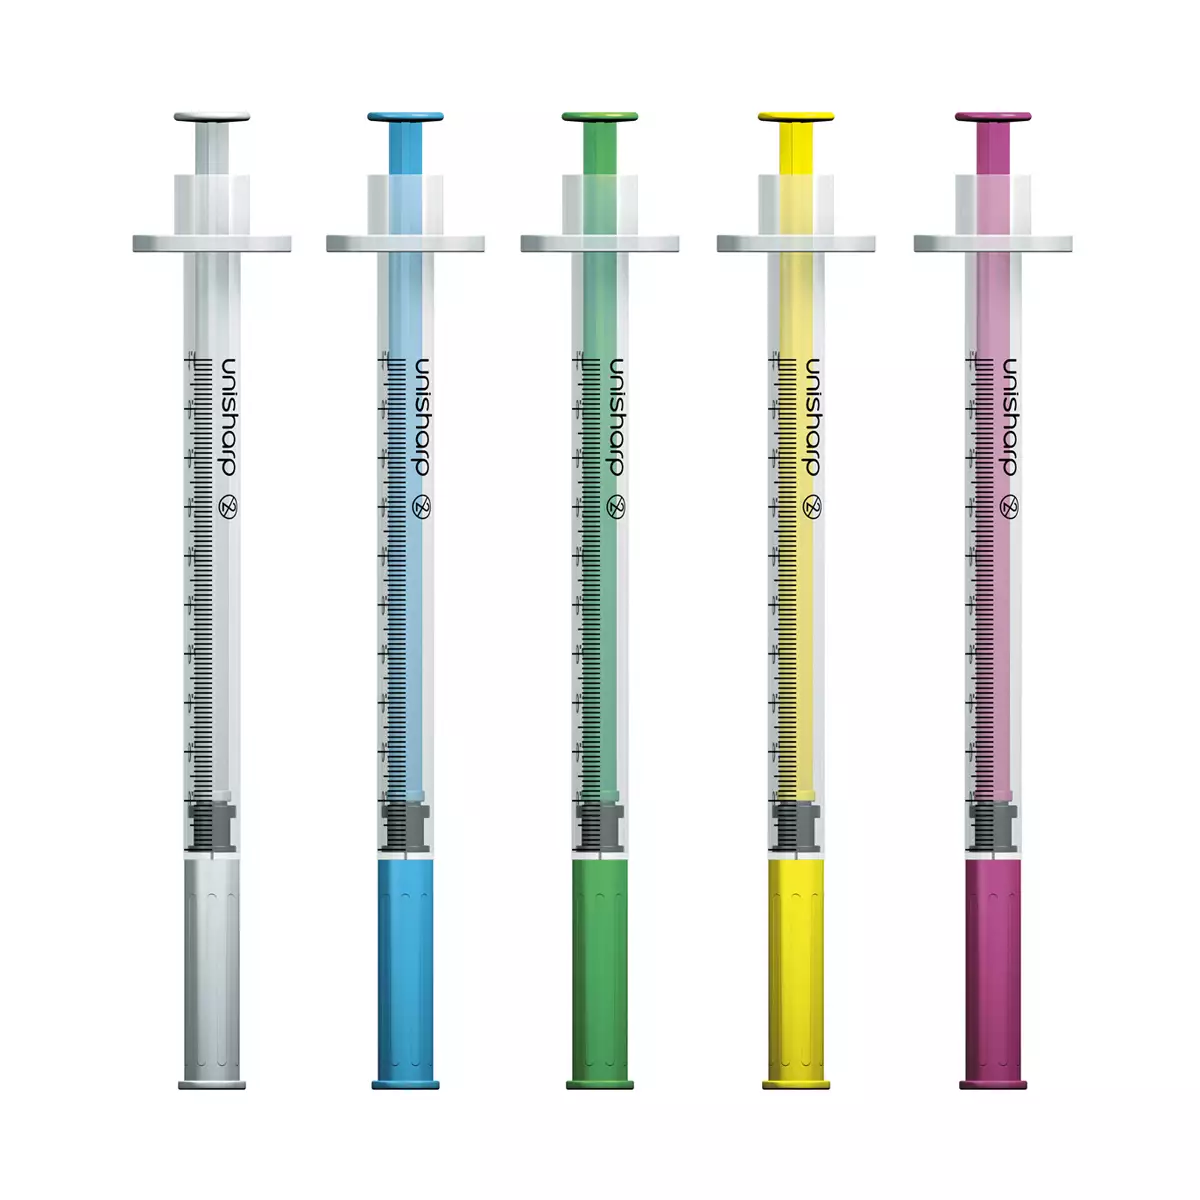 Tanning Injection syringes from the UK's best Melanotan Tanning Injection Suppliers